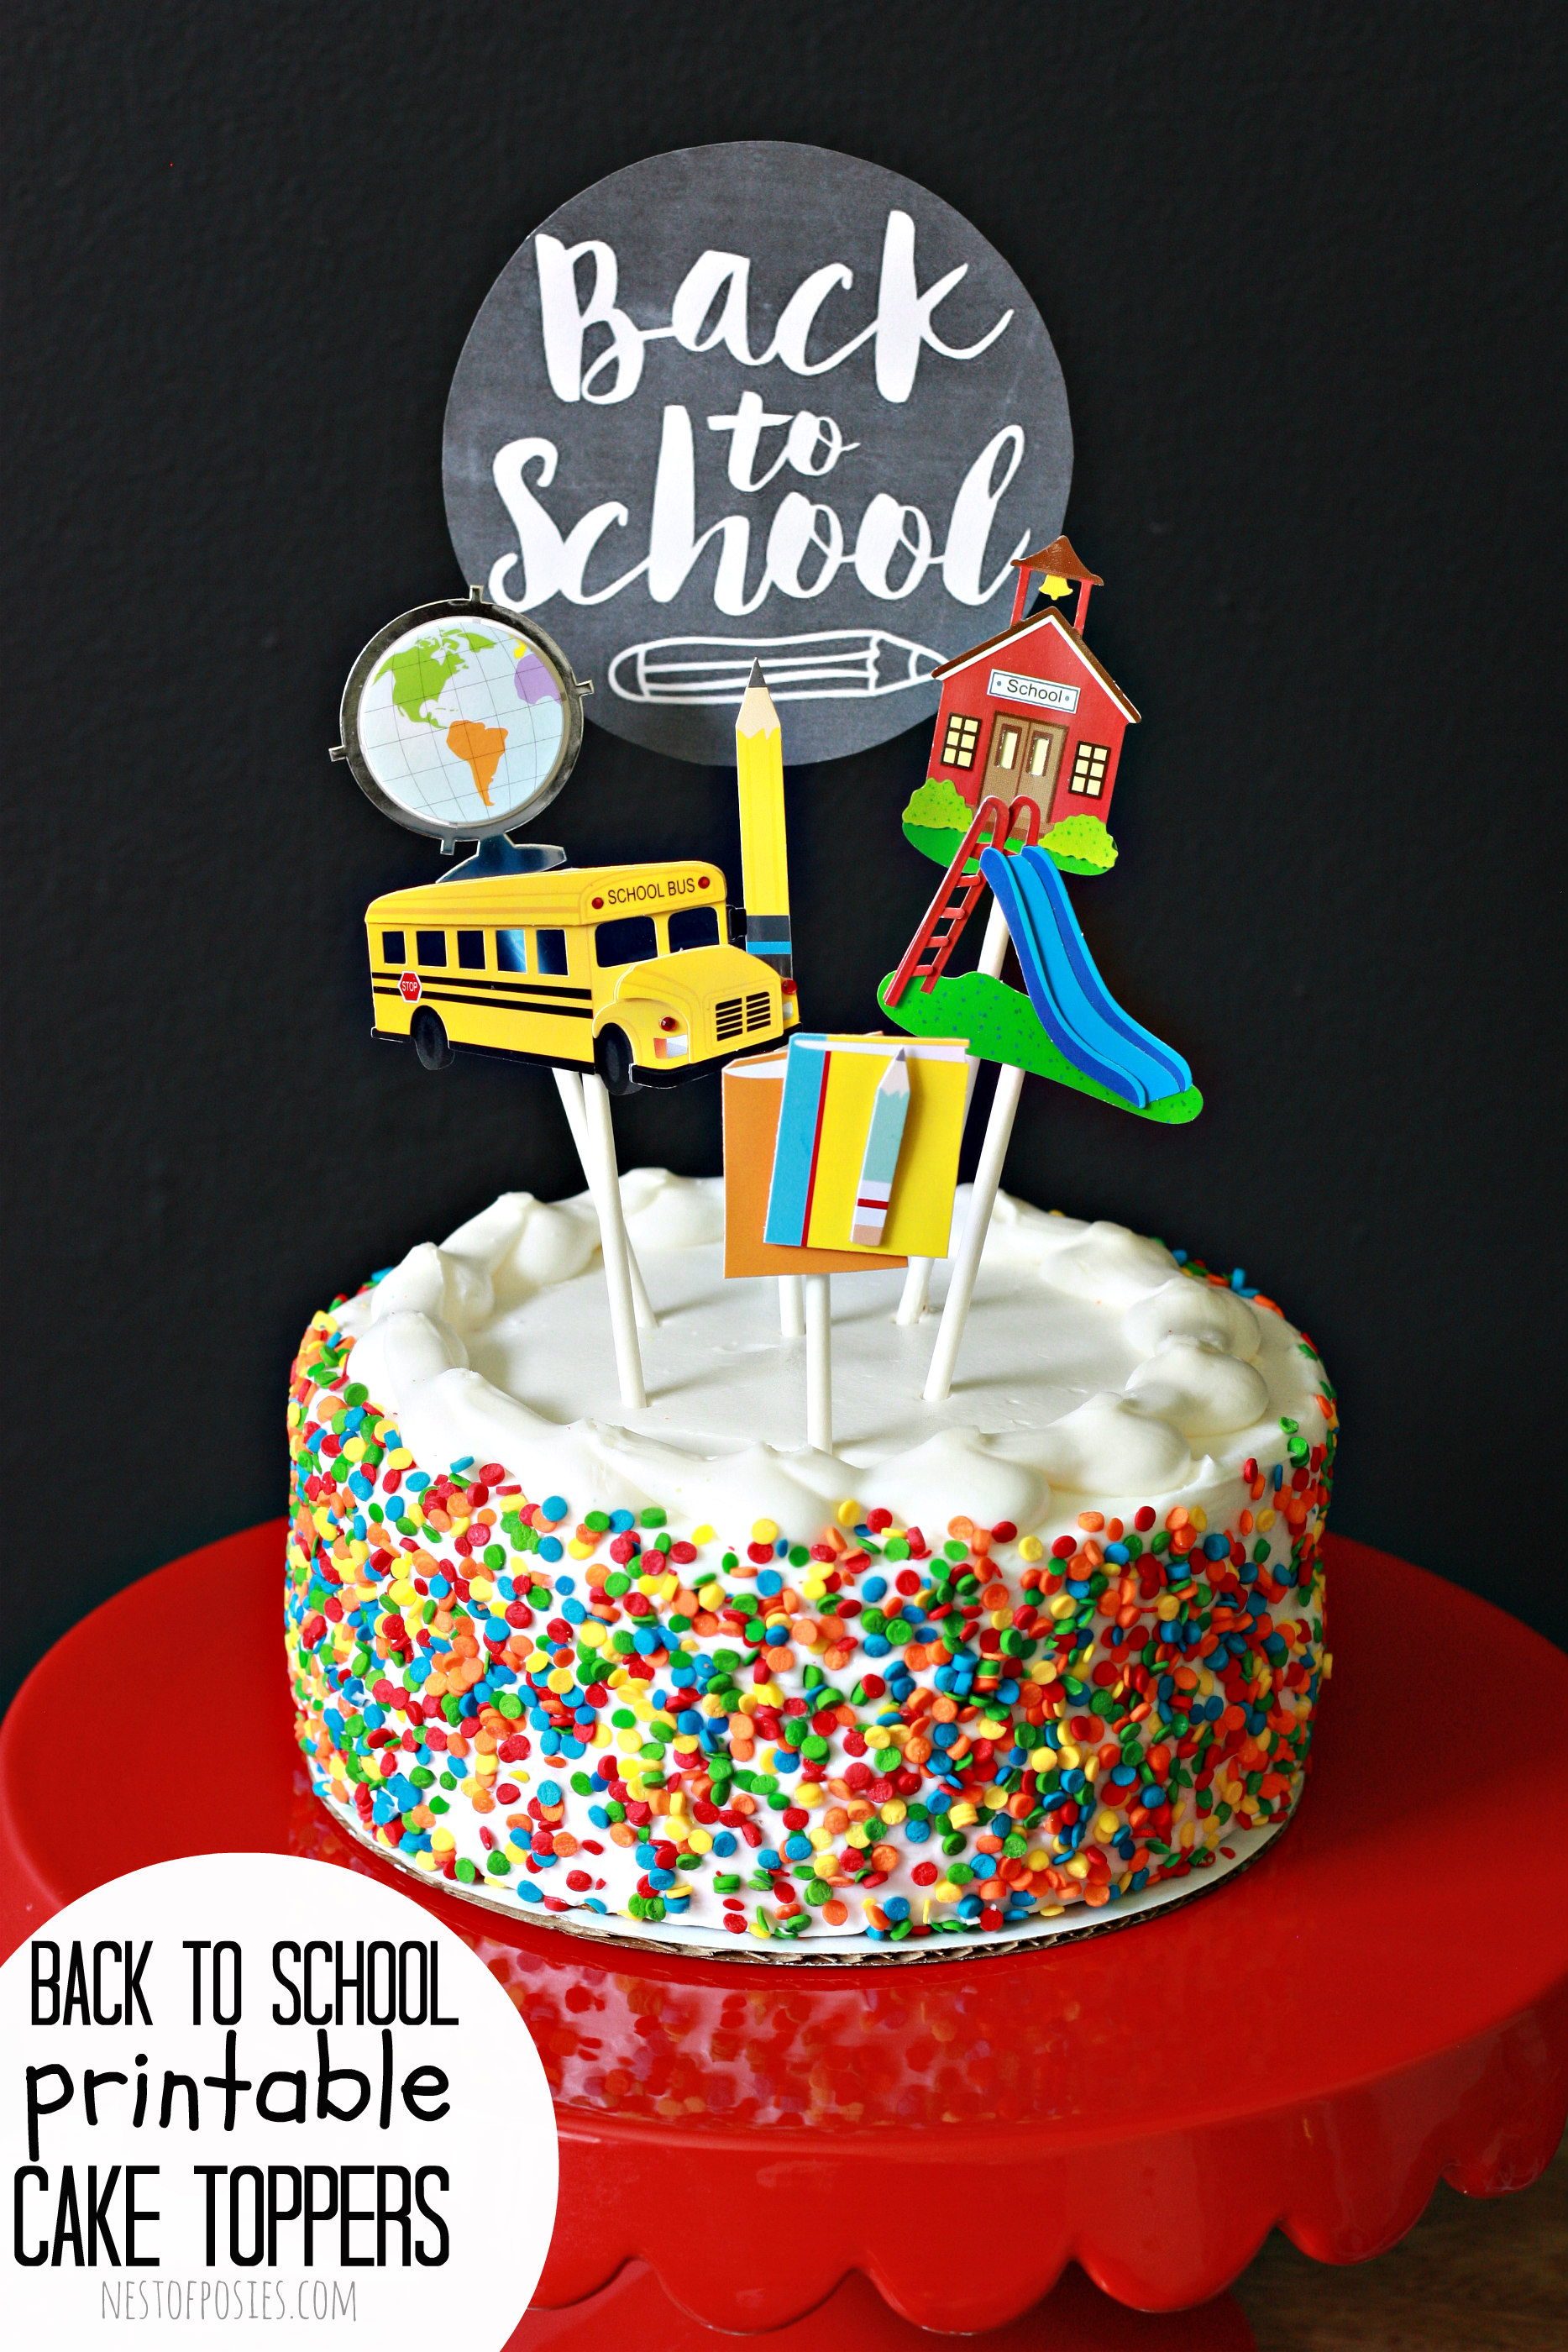 Cake Toppers for Back to School. Free download